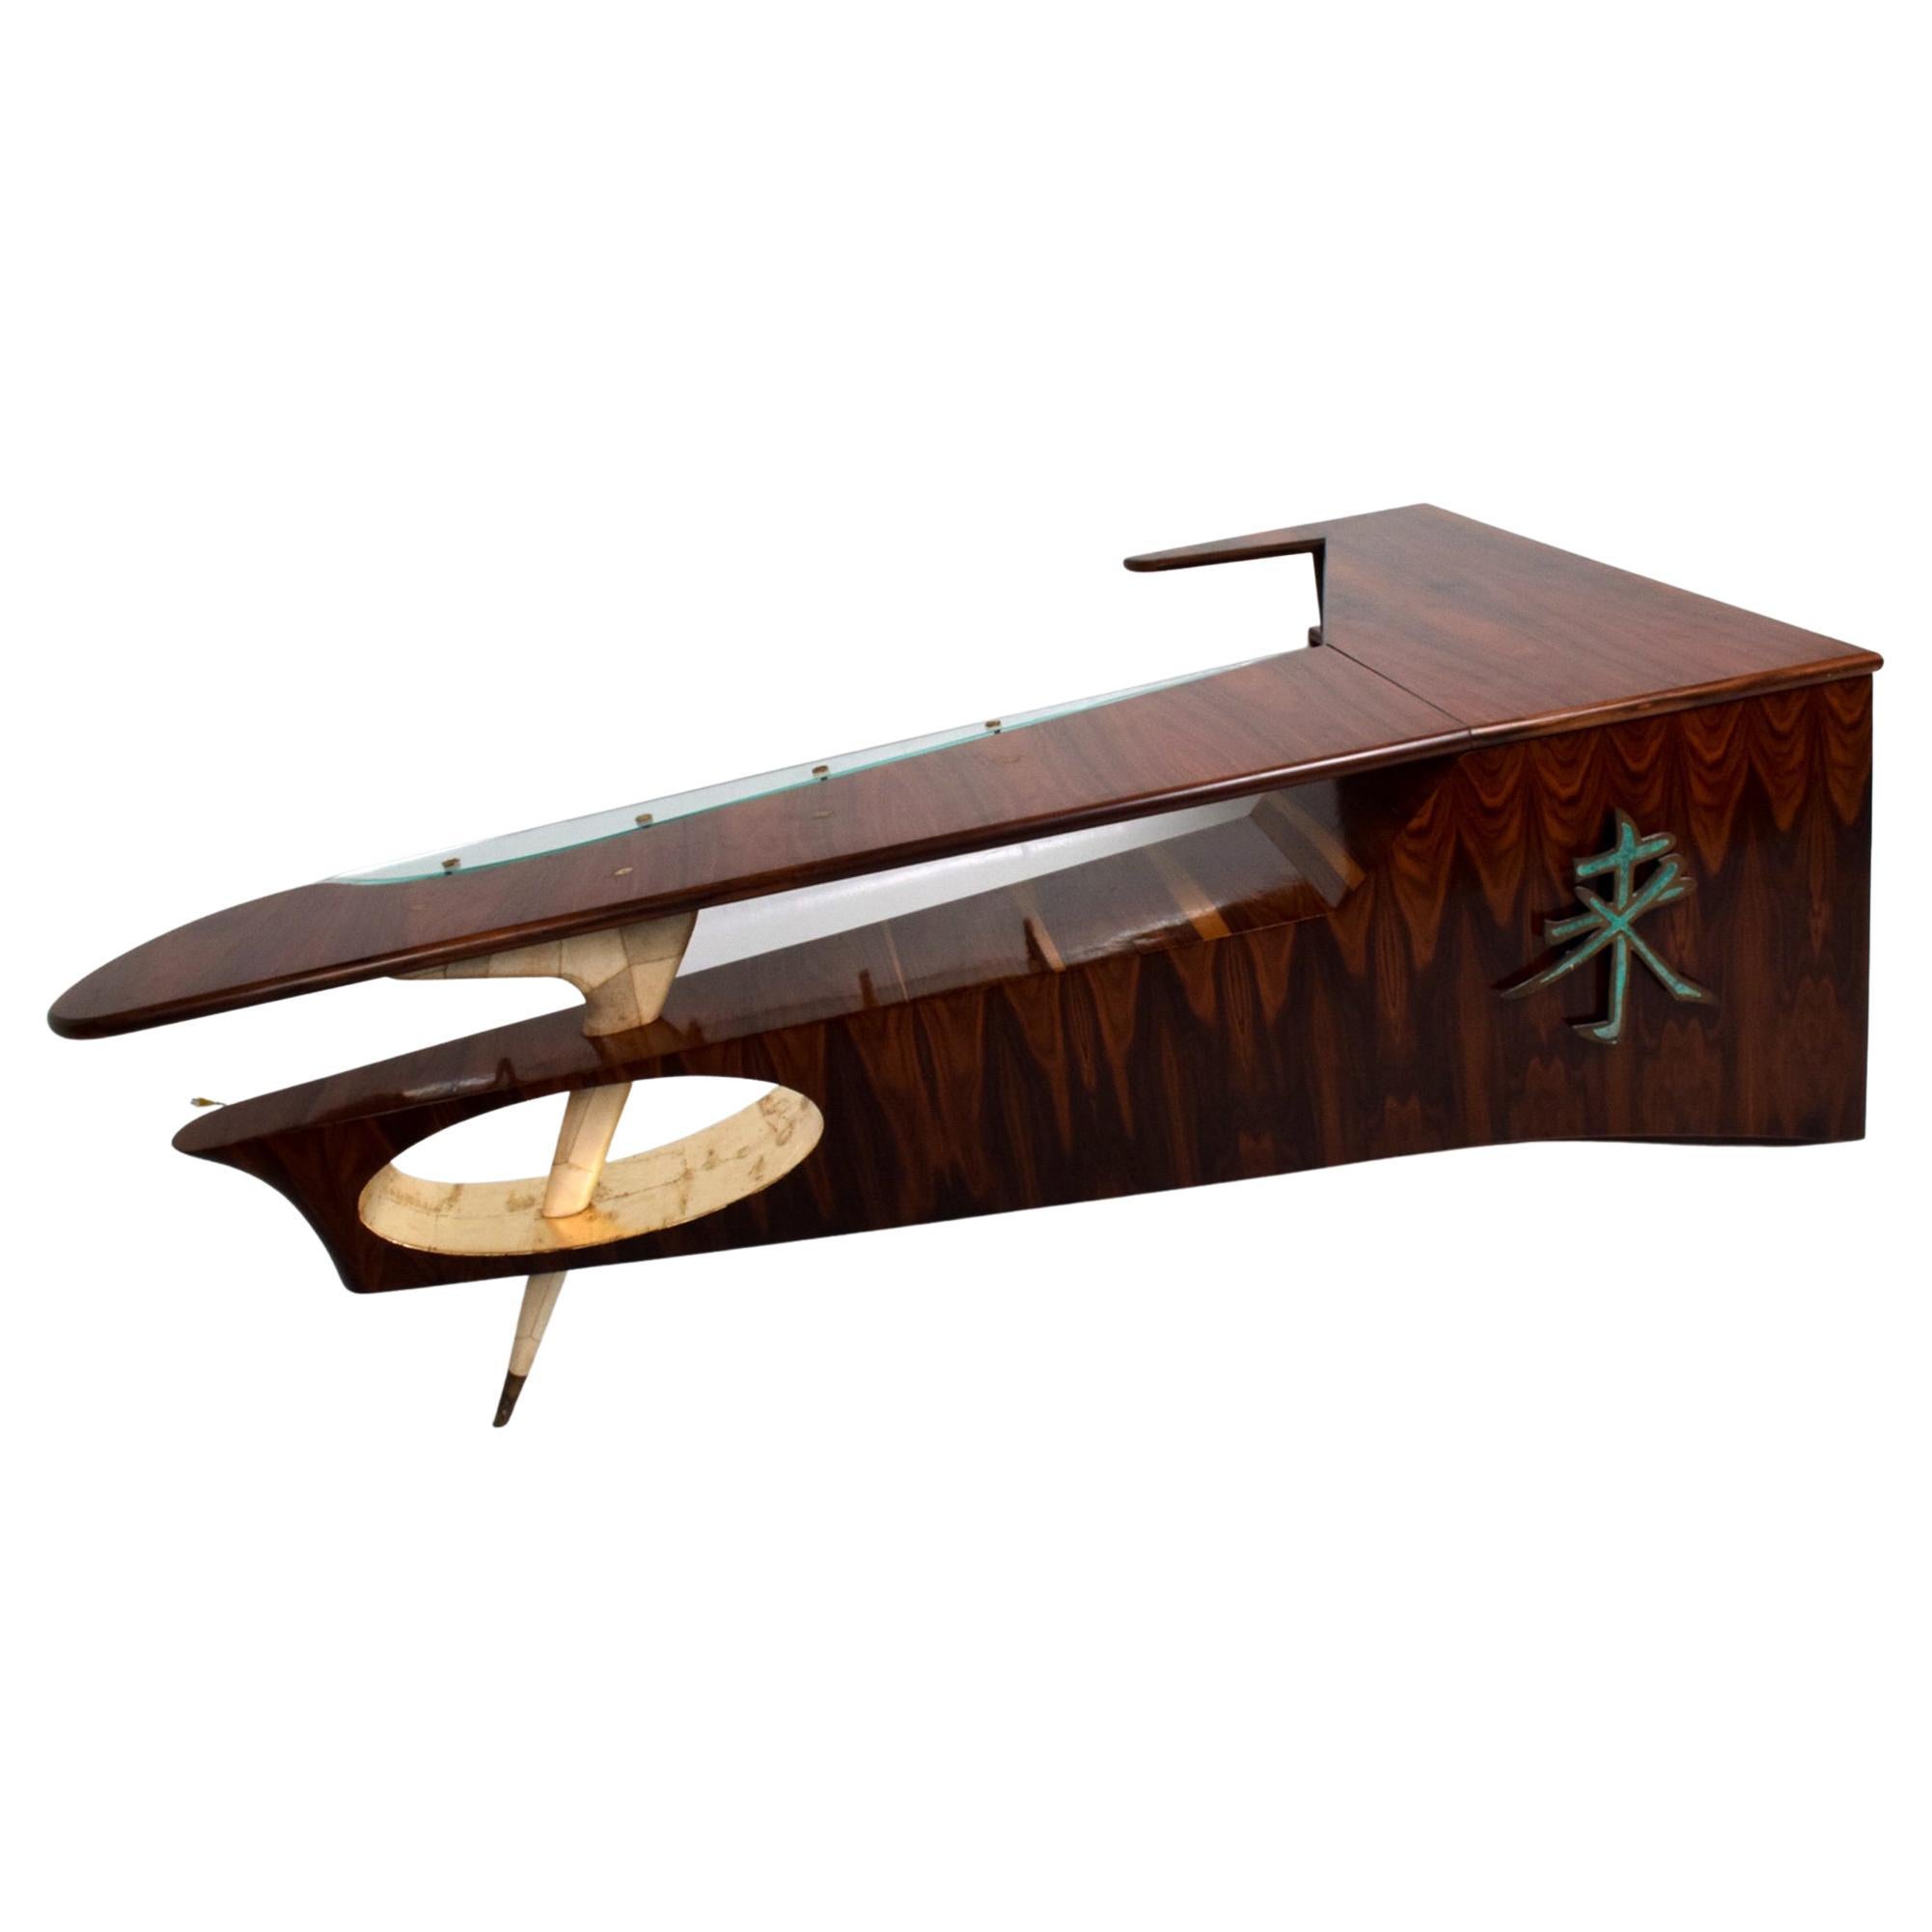 Custom Sculptural Desk Dry Bar in Rosewood and Parchment Bronze applications designed by FRANK KYLE.
Made Mexico circa 1950s.
Malachite hardware by PEPE MENDOZA foundry marks present.
Front receiving is supported by a single angled tapered leg. Leg